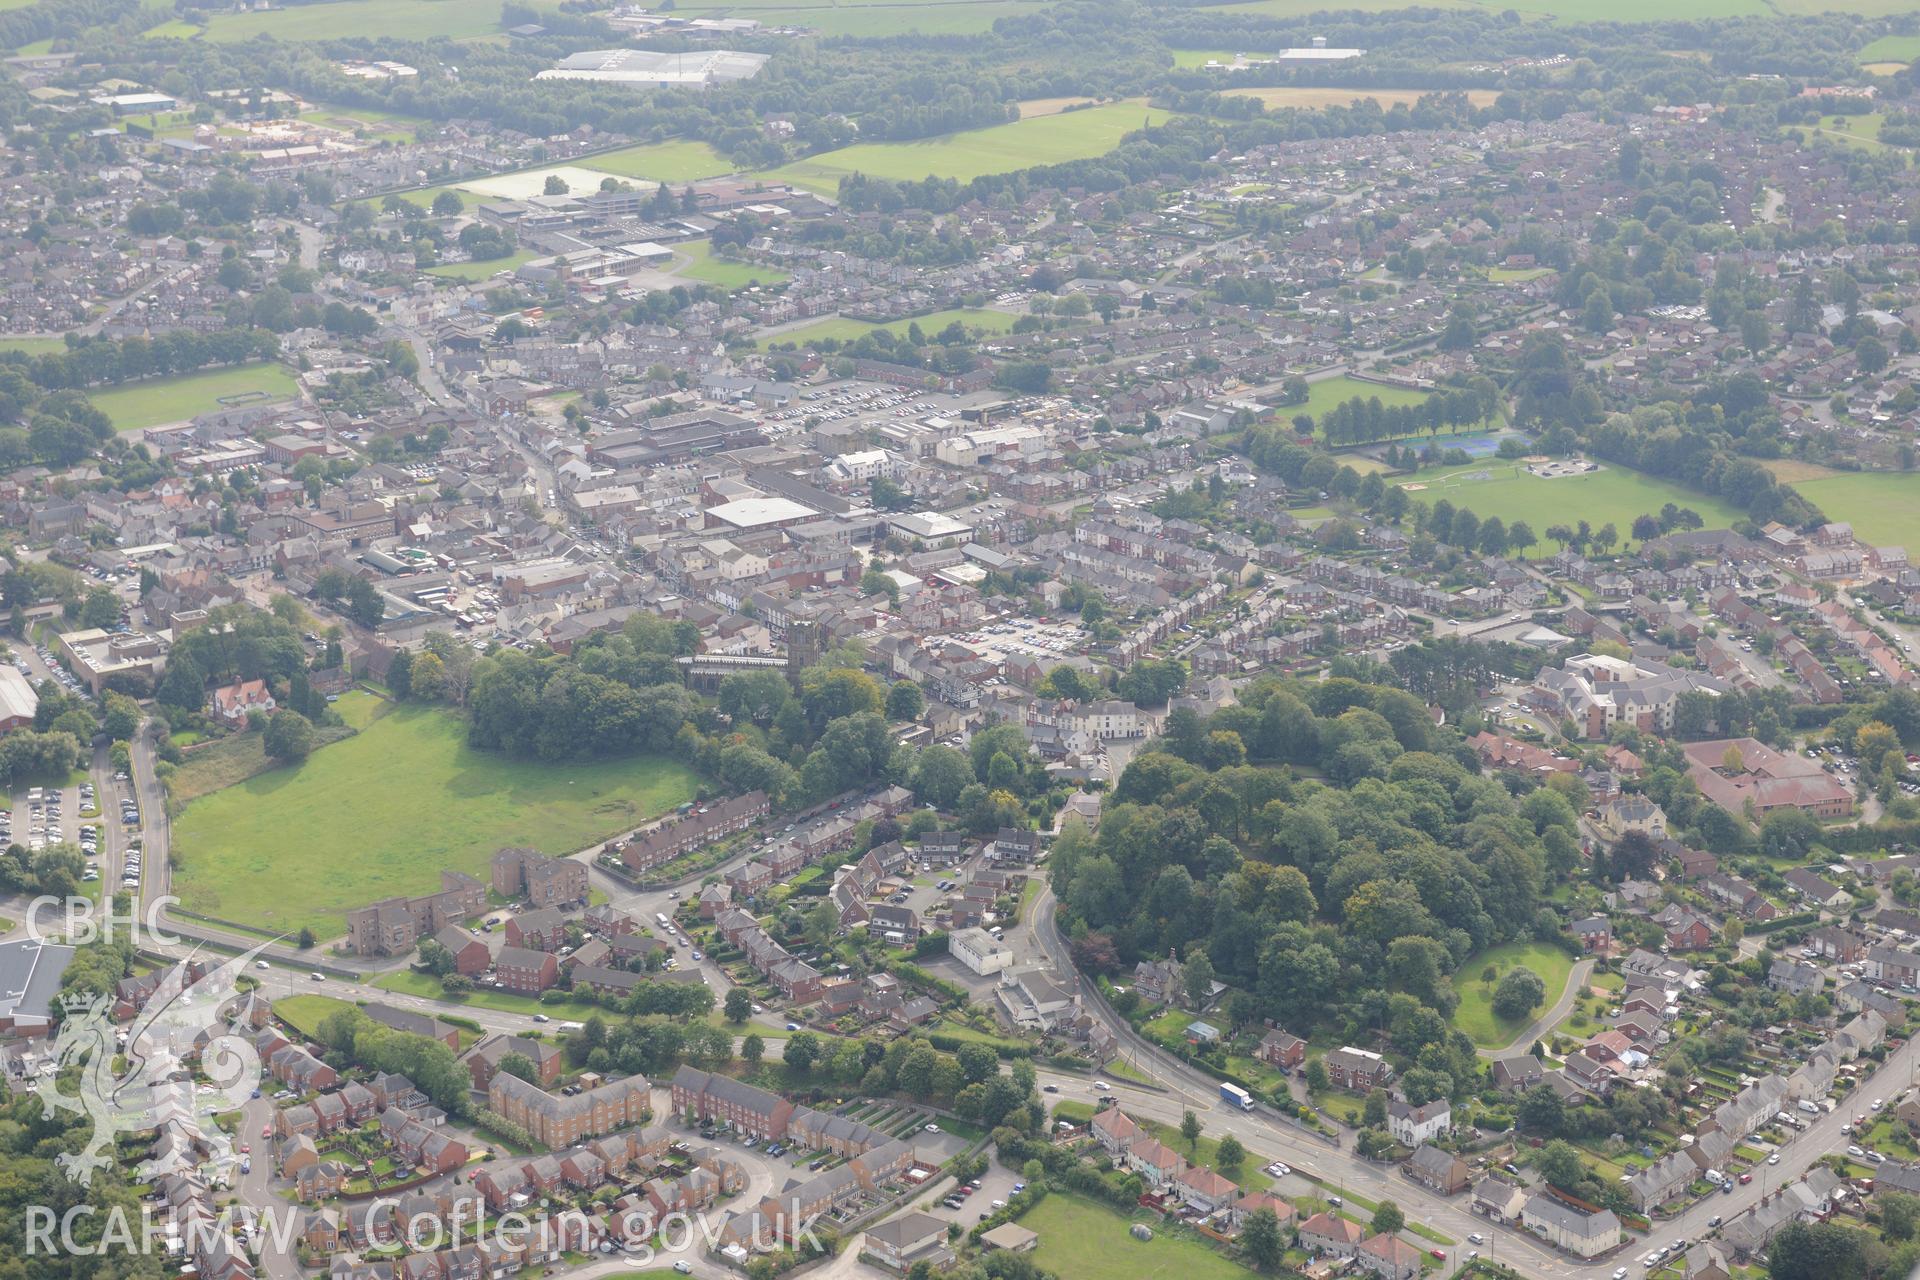 Mold castle and the surrounding town, Mold. Oblique aerial photograph taken during the Royal Commission's programme of archaeological aerial reconnaissance by Toby Driver on 11th September 2015.